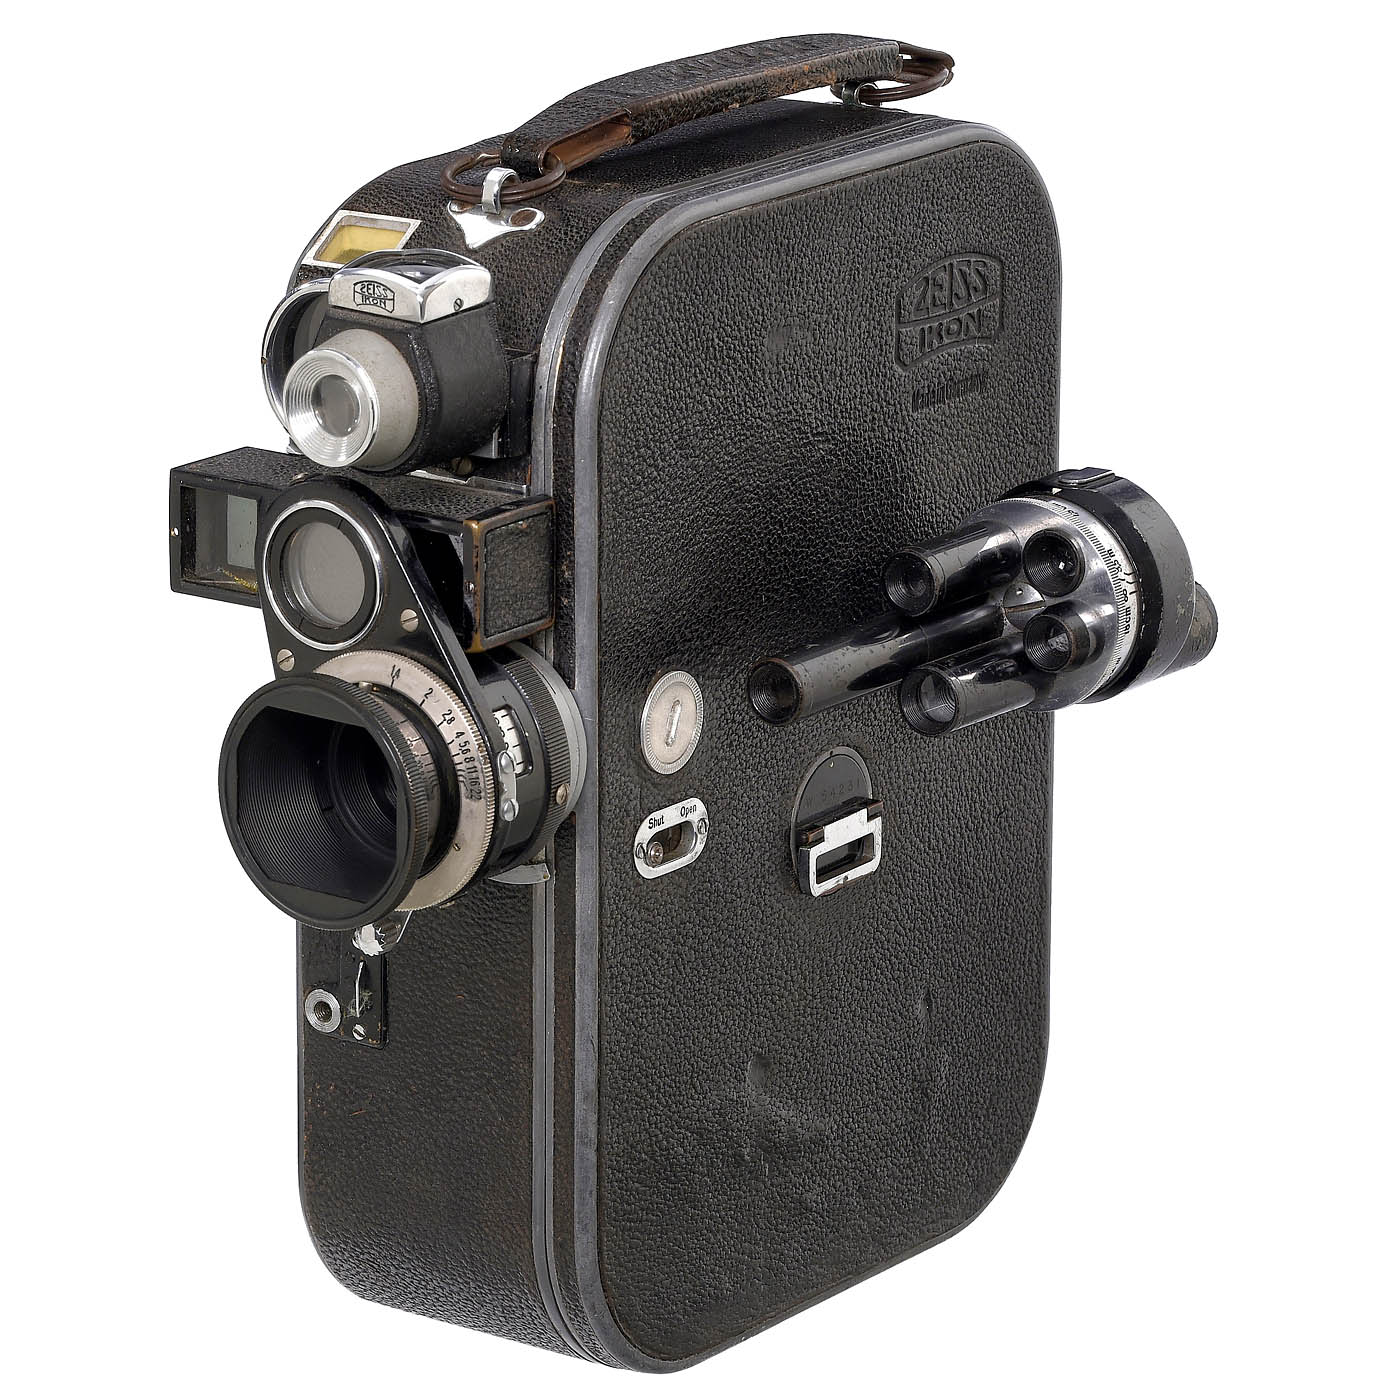 Movikon 16 Camera Outfit, c. 1934 - Image 2 of 5